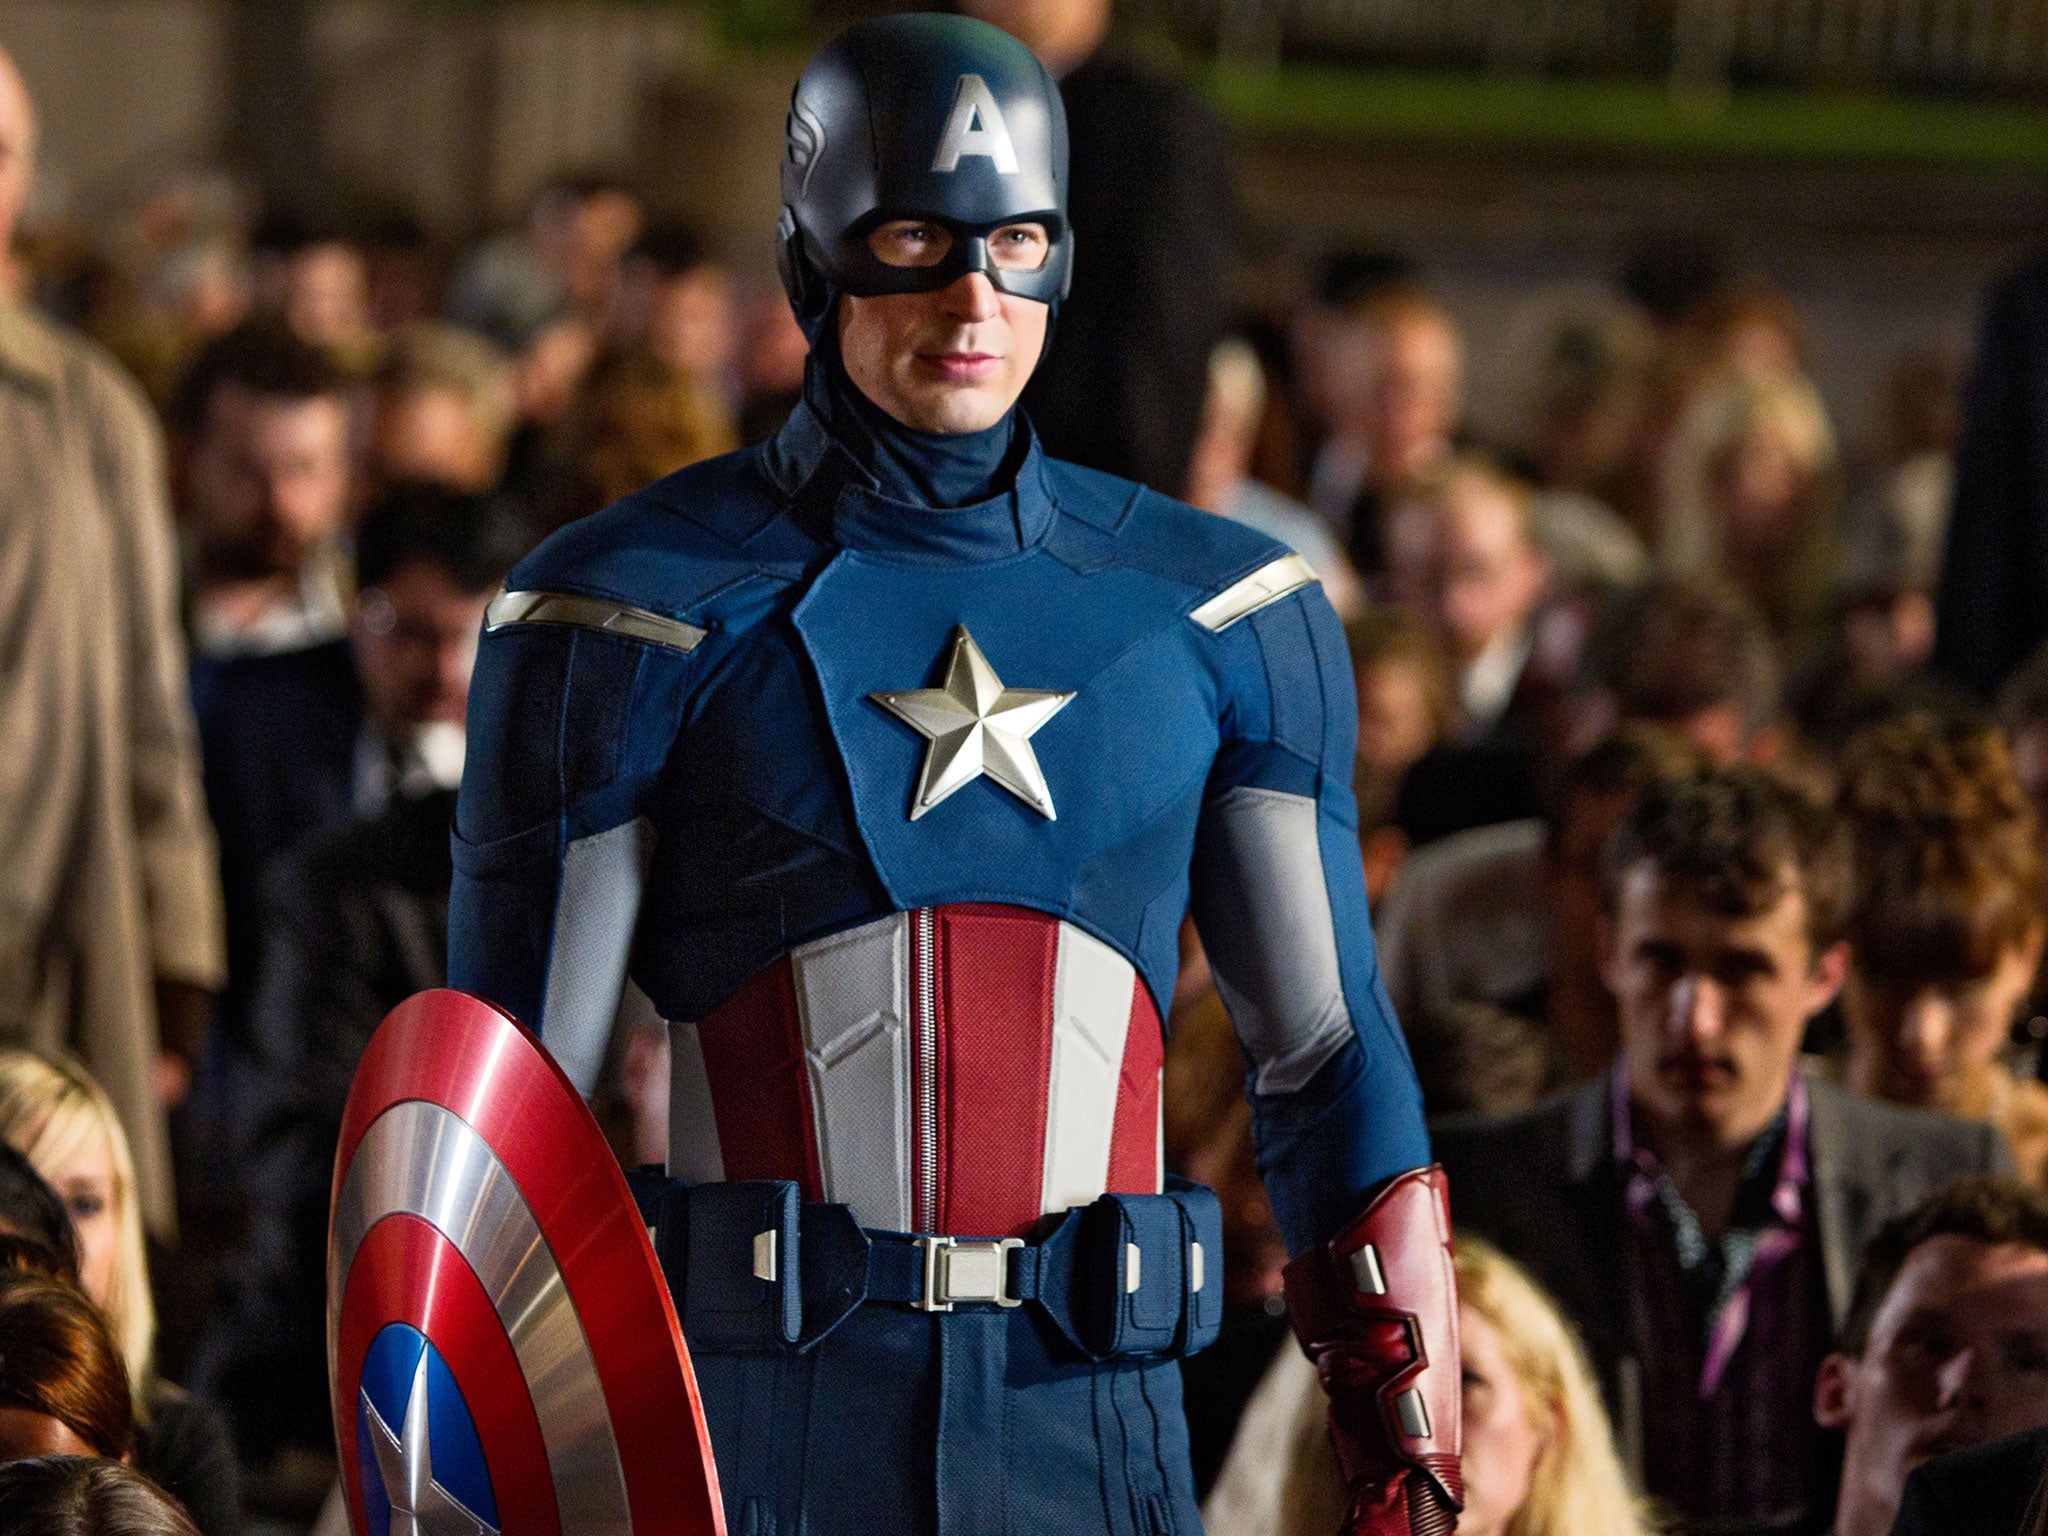 Captain America 3: Russo Brothers drop plot hints as fan speculation mounts, The Independent